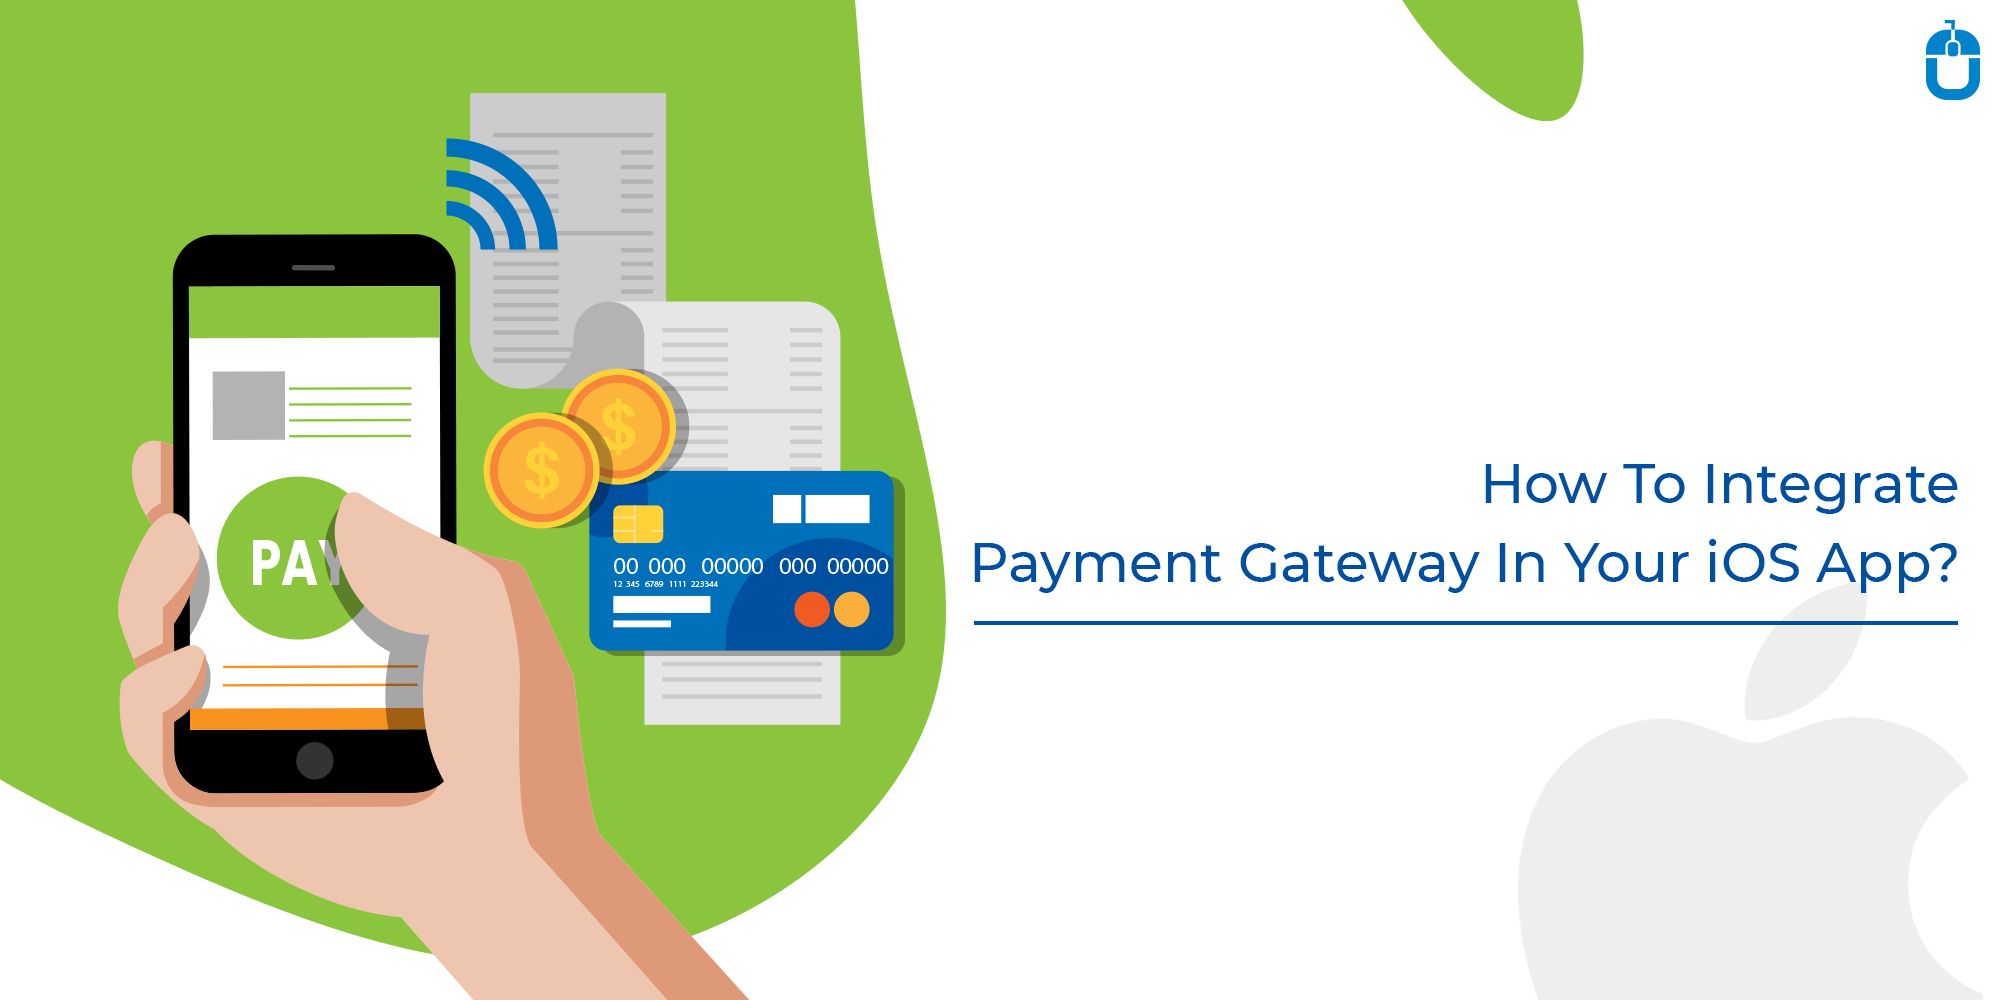 How To Integrate Payment Gateway In Your iOS App?